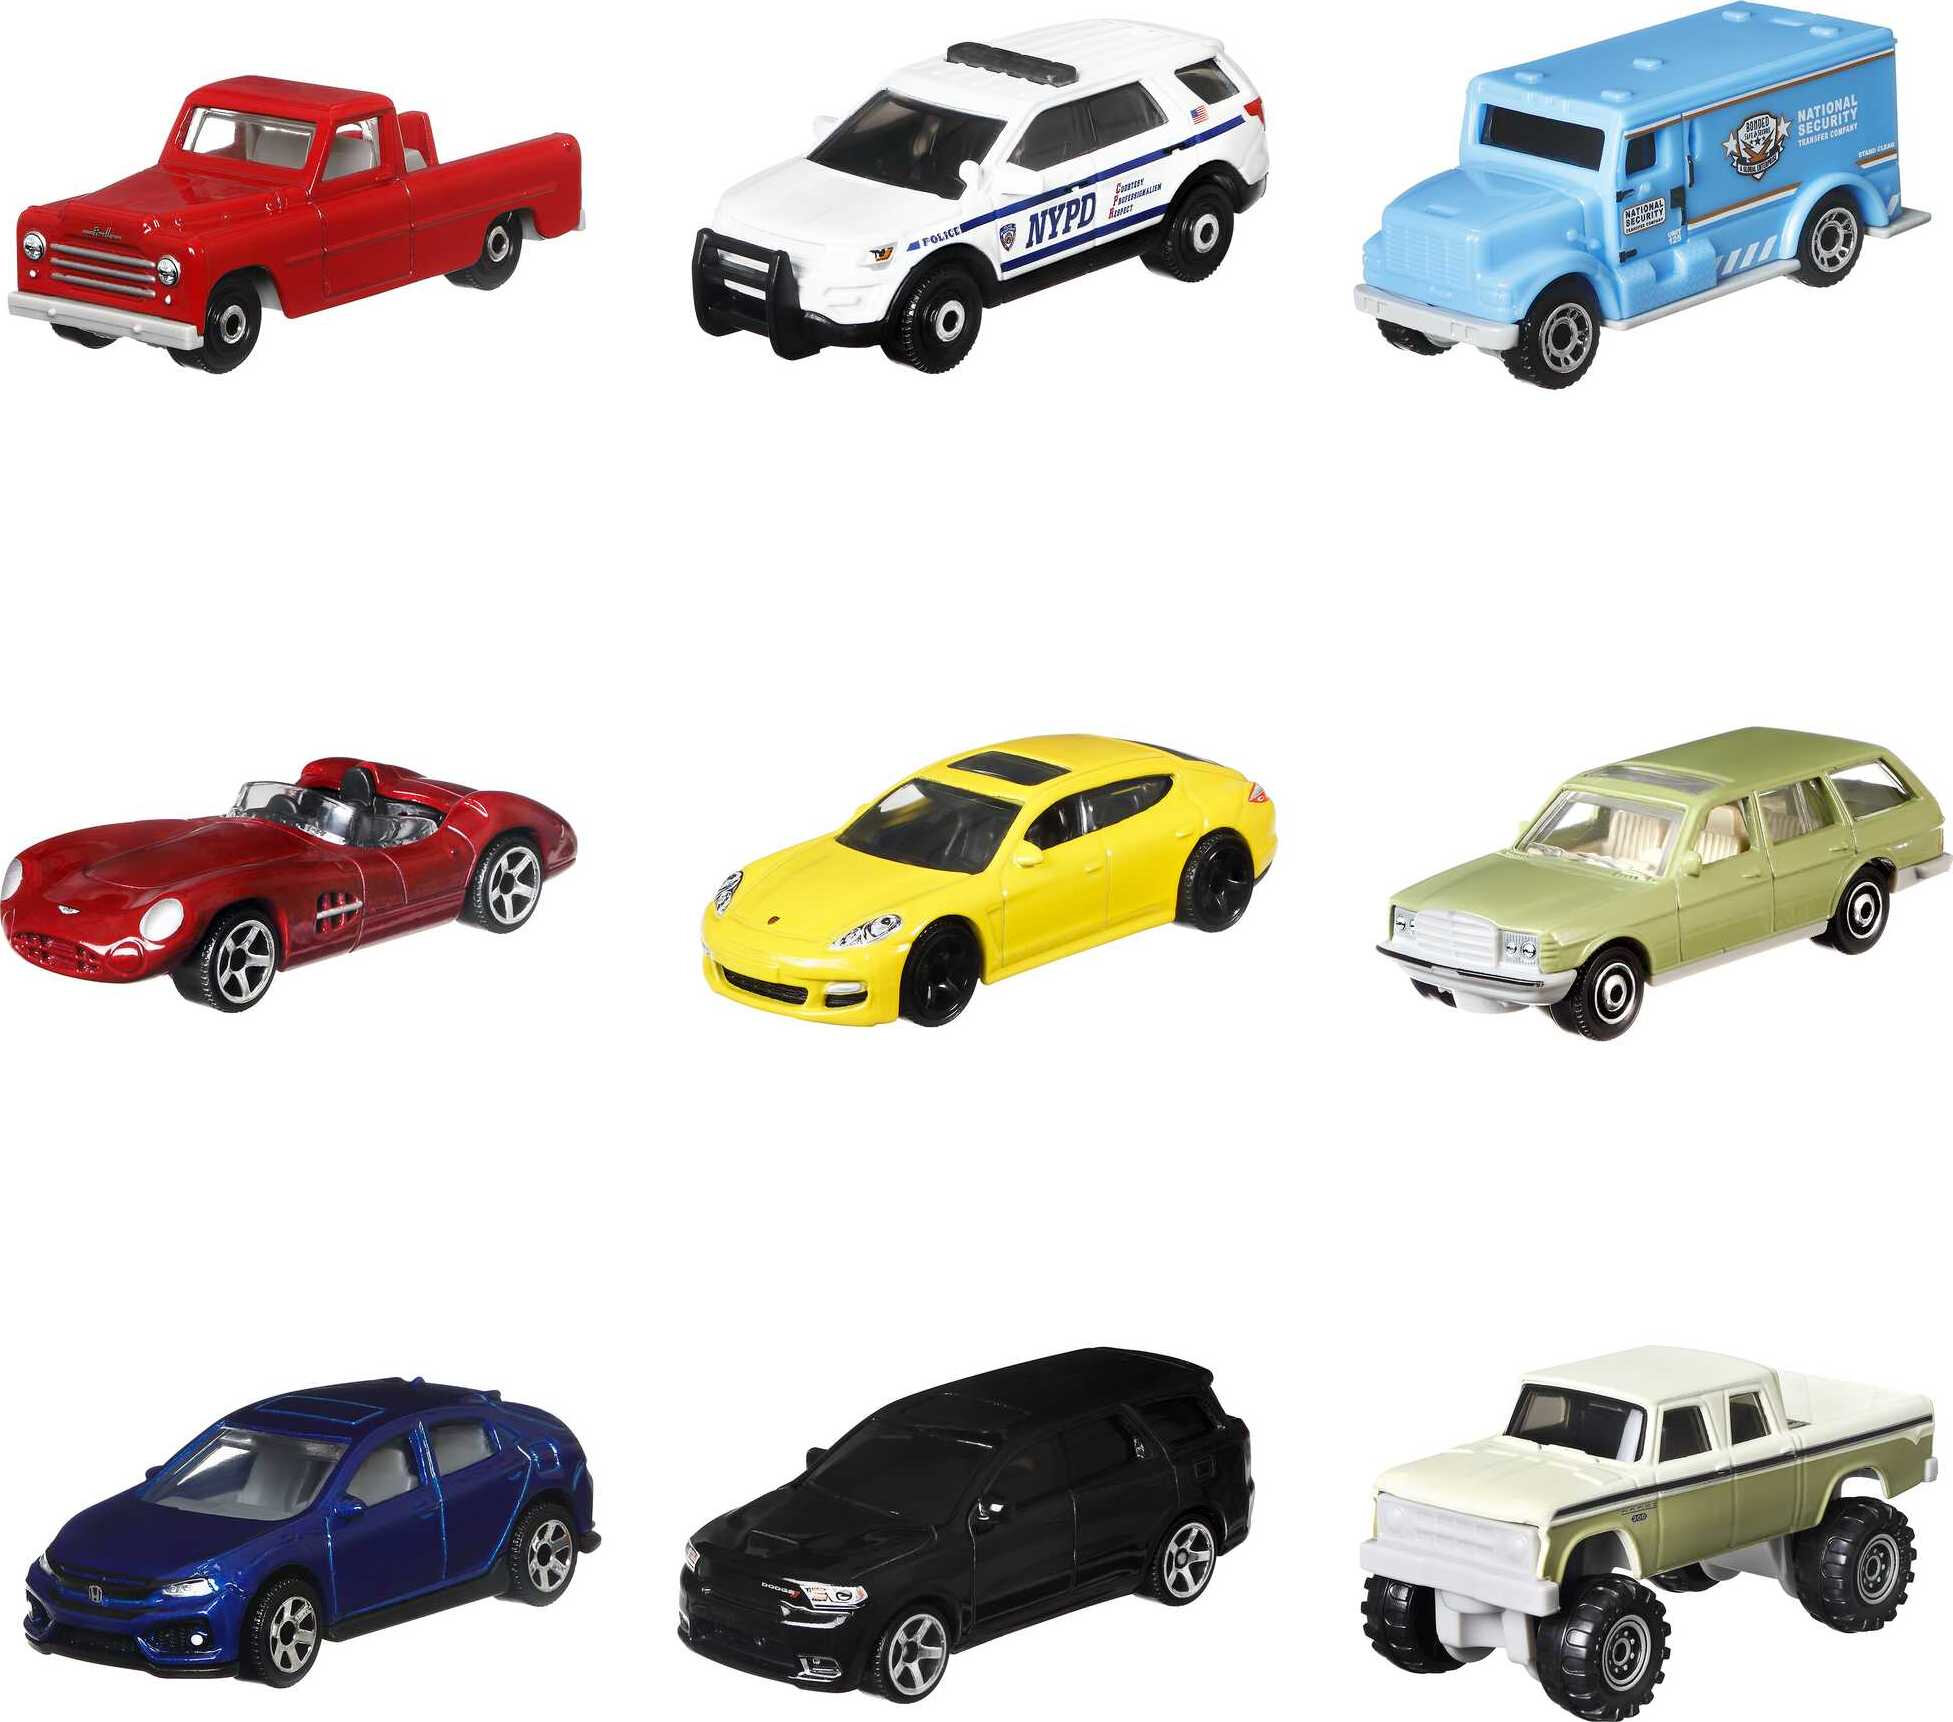 Matchbox Gift Set of 9 Themed Cars or Trucks in 1:64 Scale (Styles May Vary) - image 2 of 6